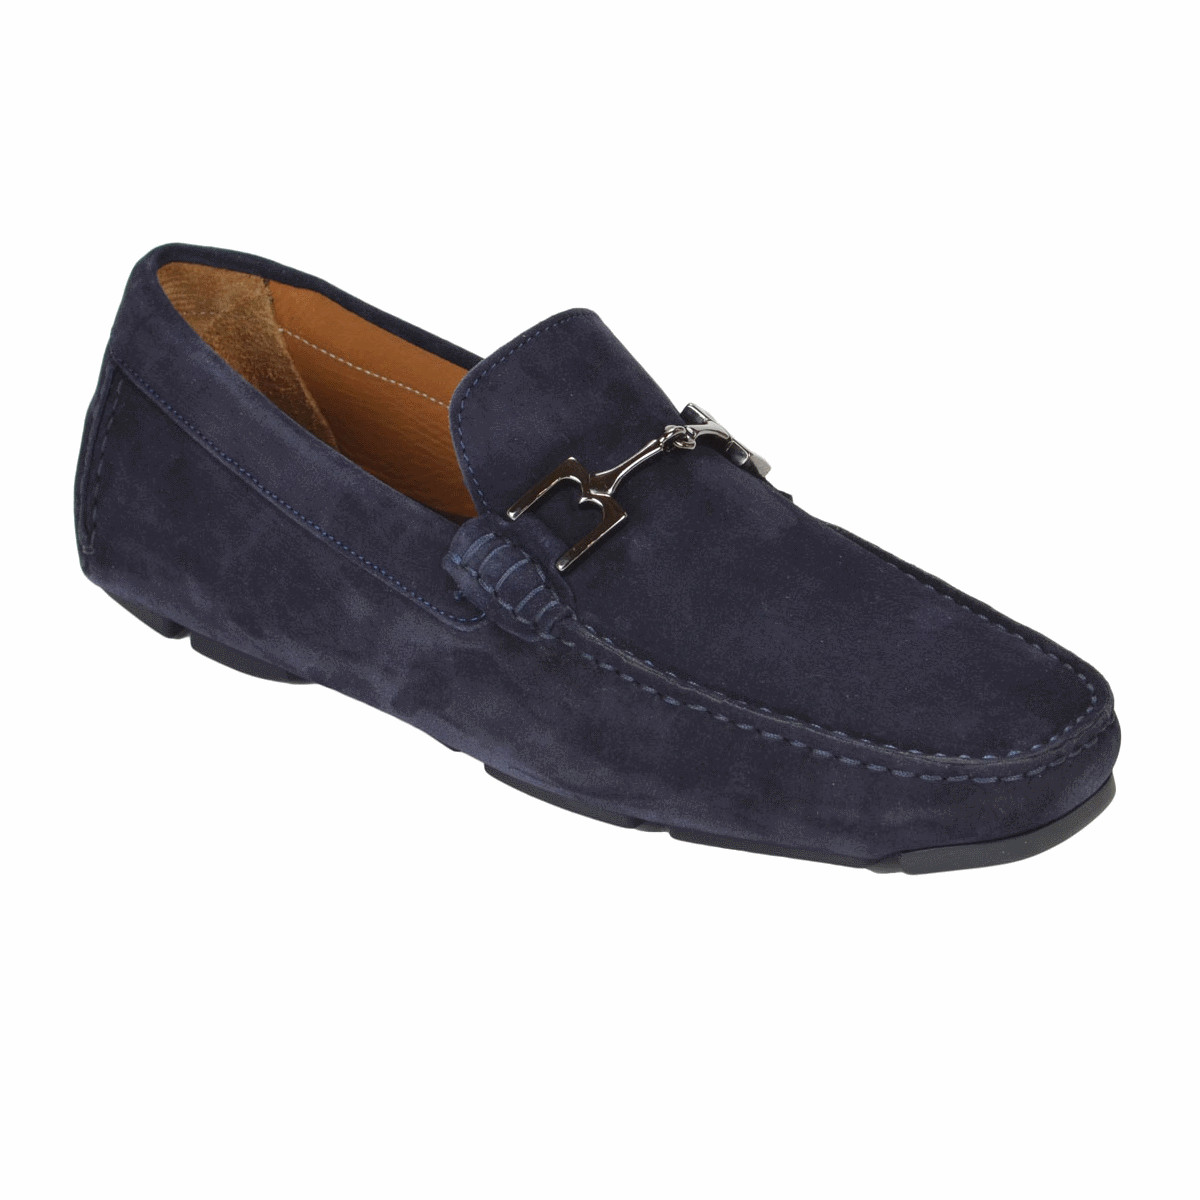 Bruno Magli Monza Suede Bit Loafers Navy Image